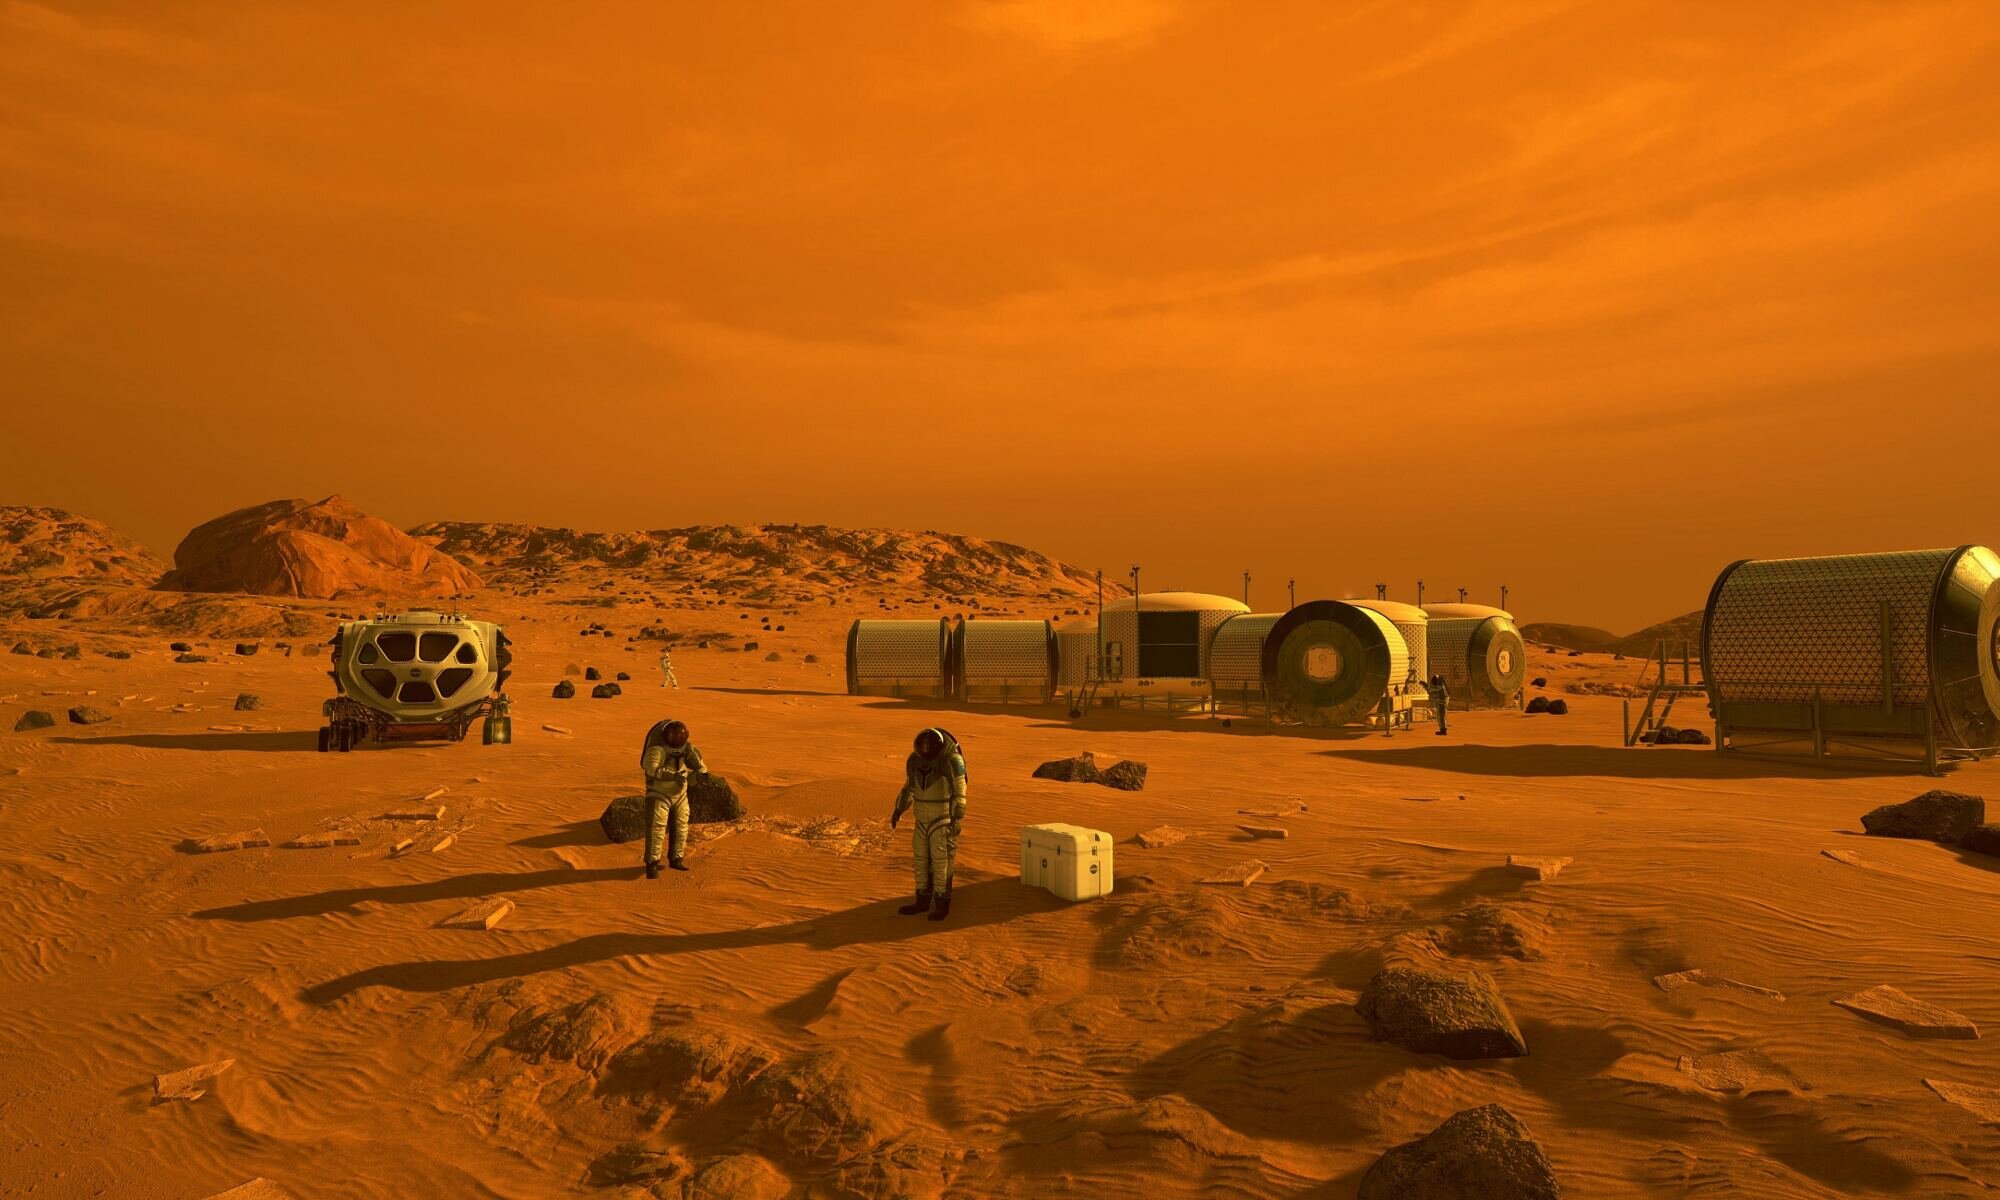 an illustration of a human colony on Mars